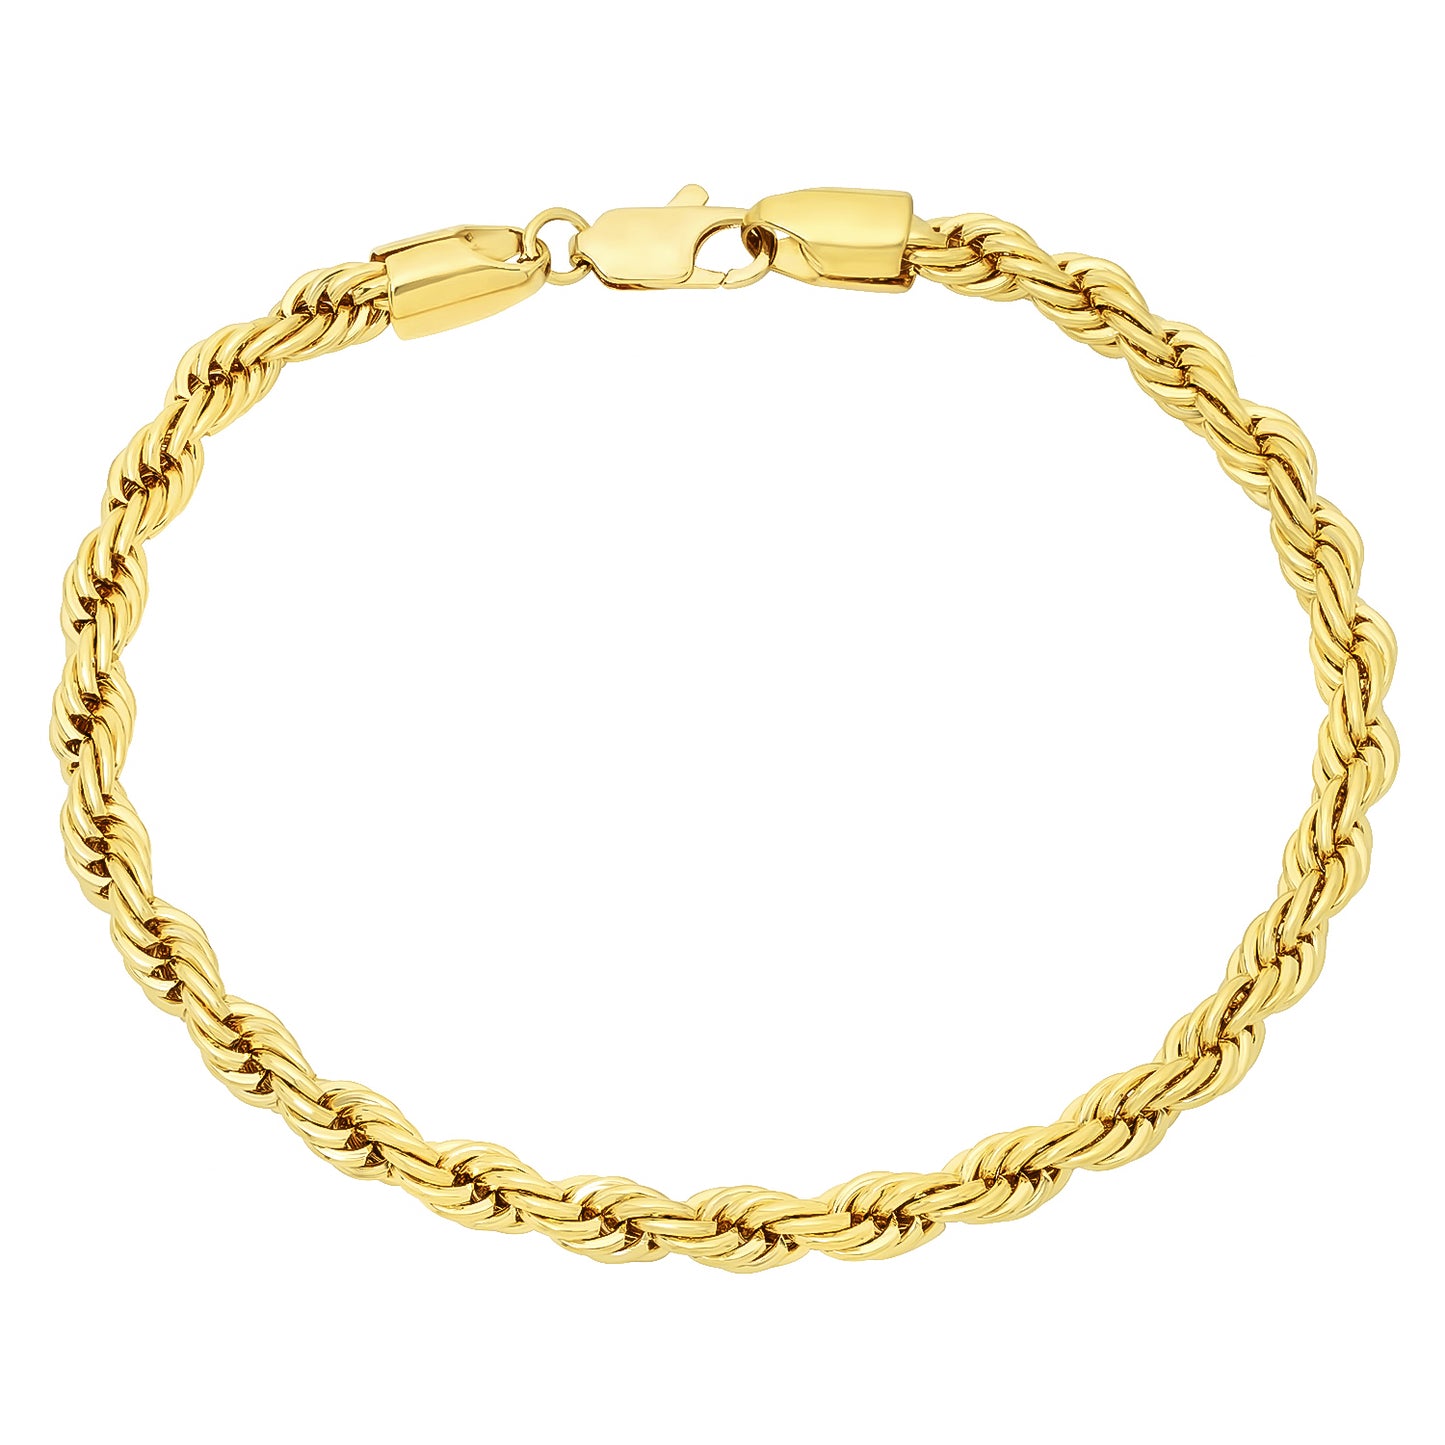 5mm High-Polished 0.25 mils (6 microns) 14k Yellow Gold Plated Twisted Rope Chain Necklace, 7'-36' (SKU: GFC105)